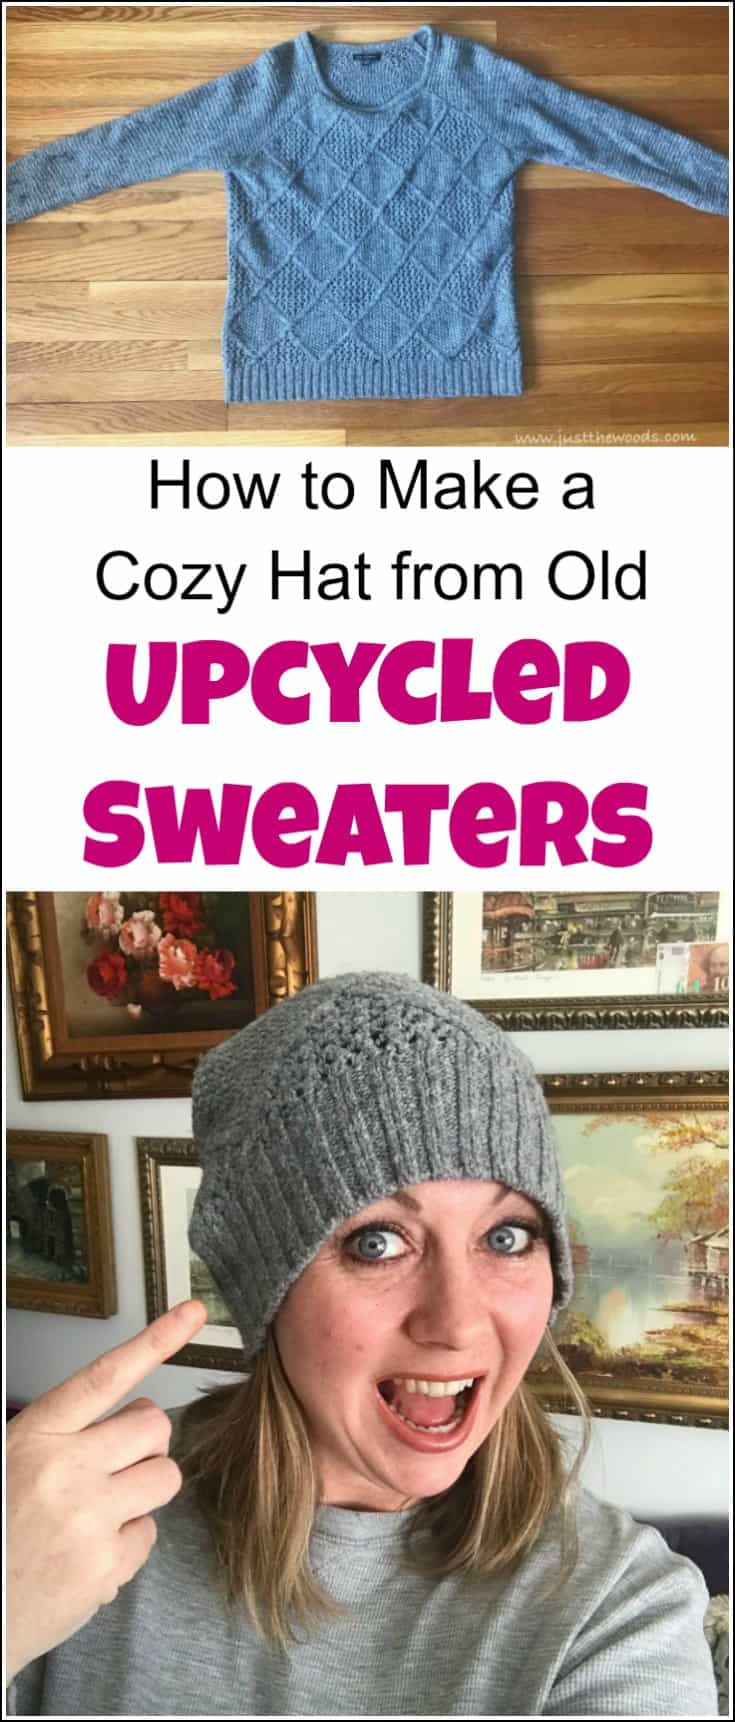 Not sure what to do with old sweaters? There are many things to do with upcycled sweaters. Upcycling sweaters, upcycled sweater, sweater upcycle, repurposed sweaters, things to do with old sweaters, recycled sweater ideas, things to make out of old sweaters, sweater craft, upcycled sweater hat, recycled sweater hat. 